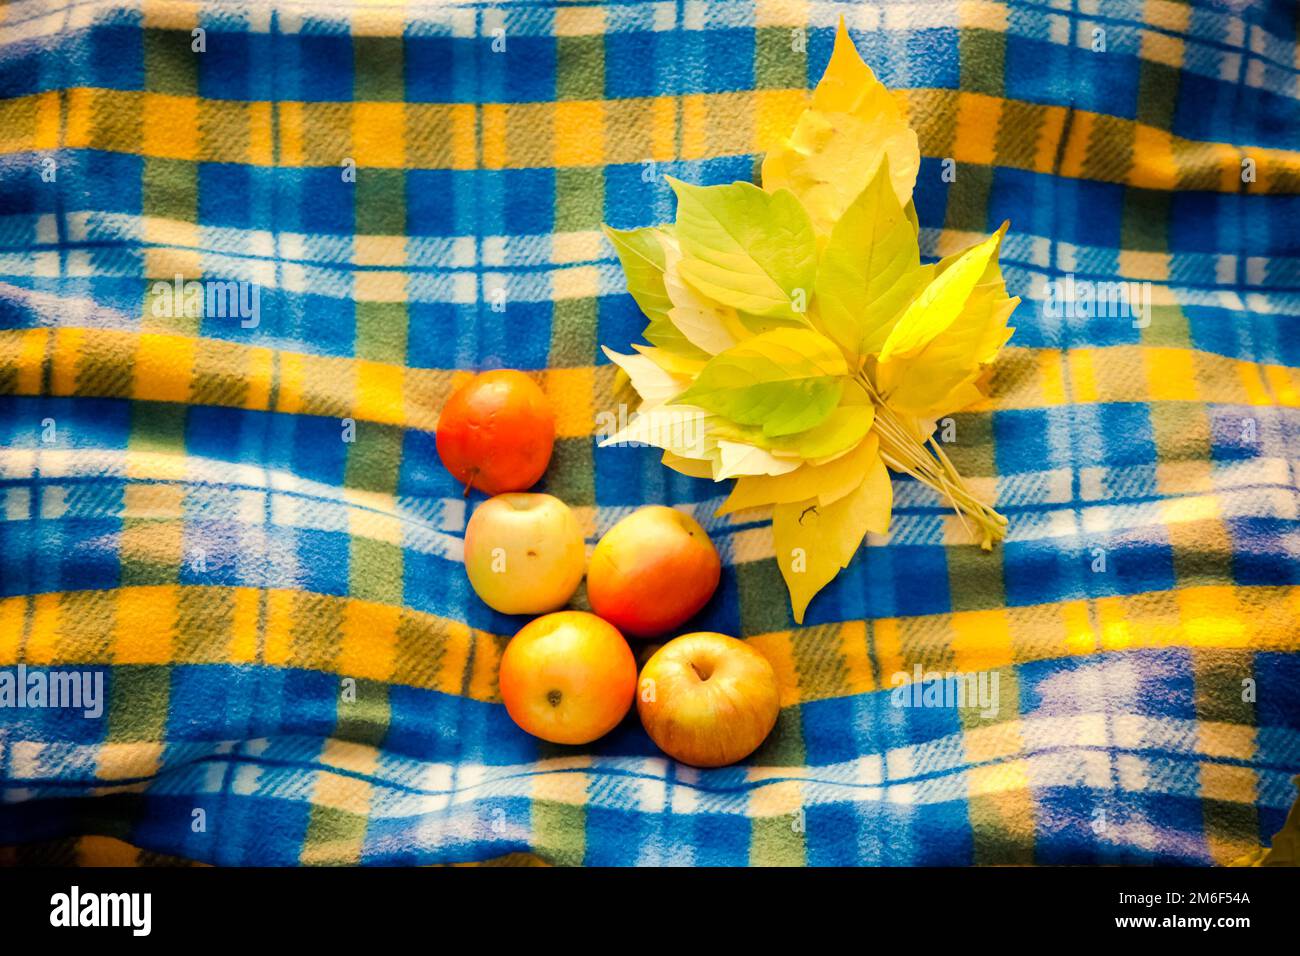 Ripe apples and yellow leaves on blanket in a cage. Stock Photo